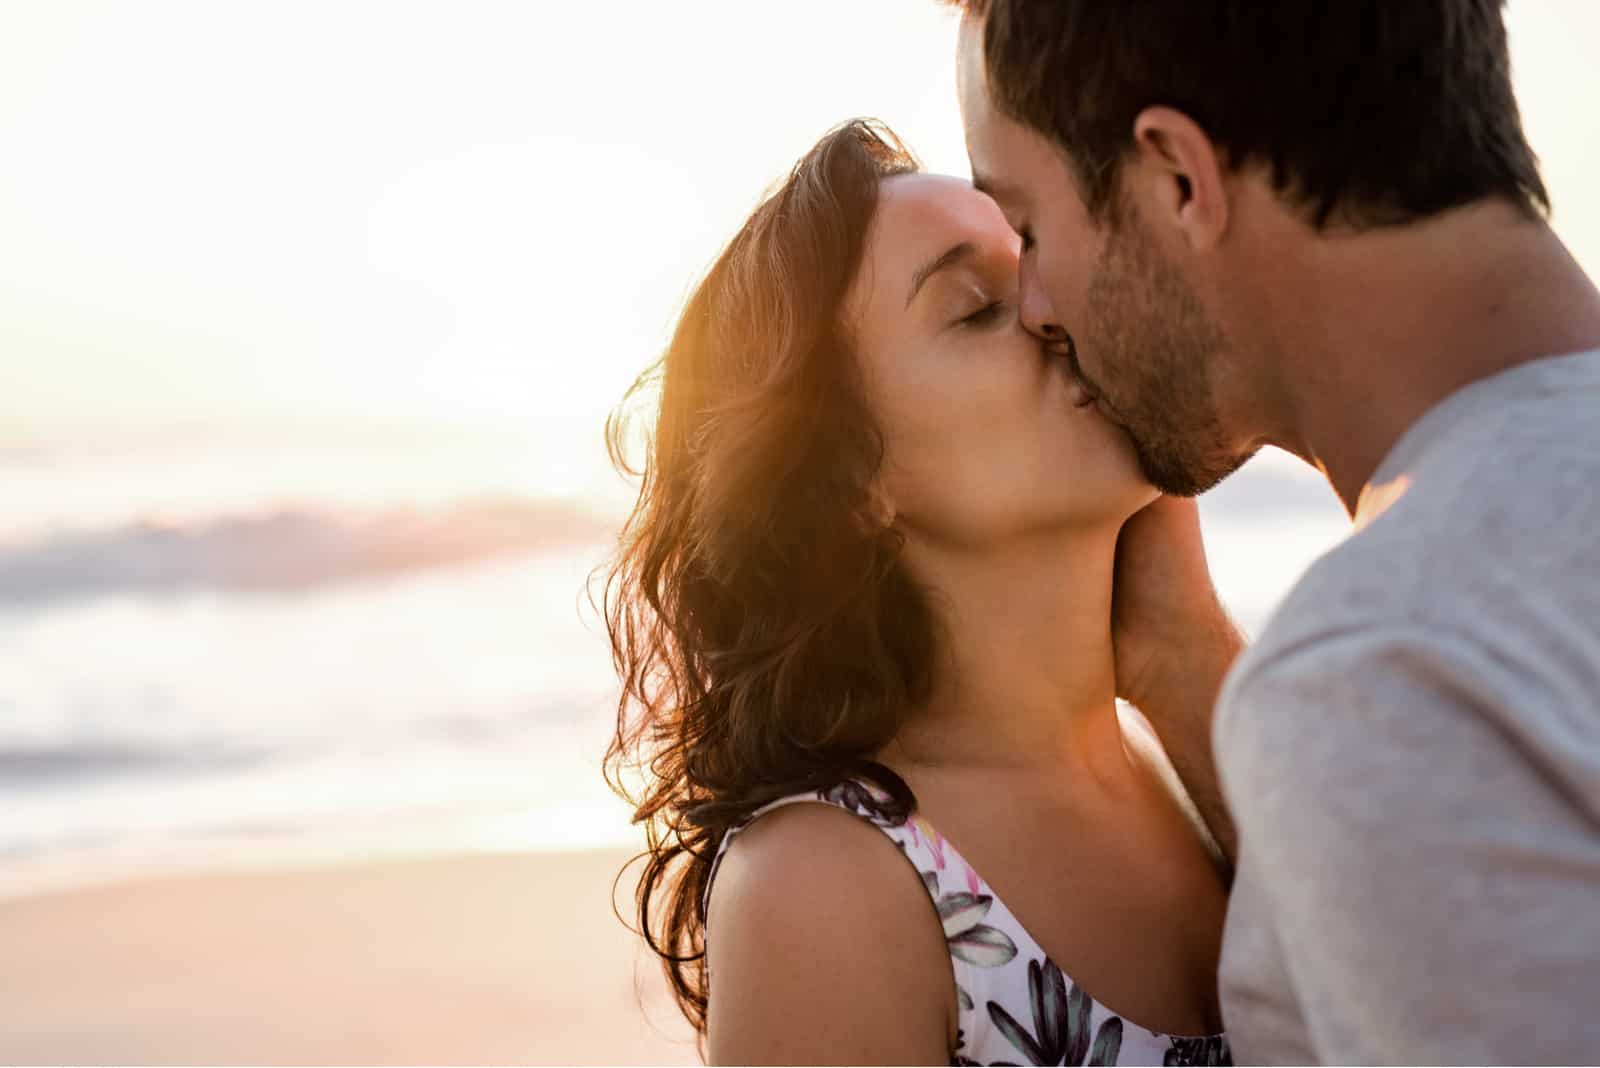 Loving young couple standing in each other's arms and kissing on a sandy beach at dusk